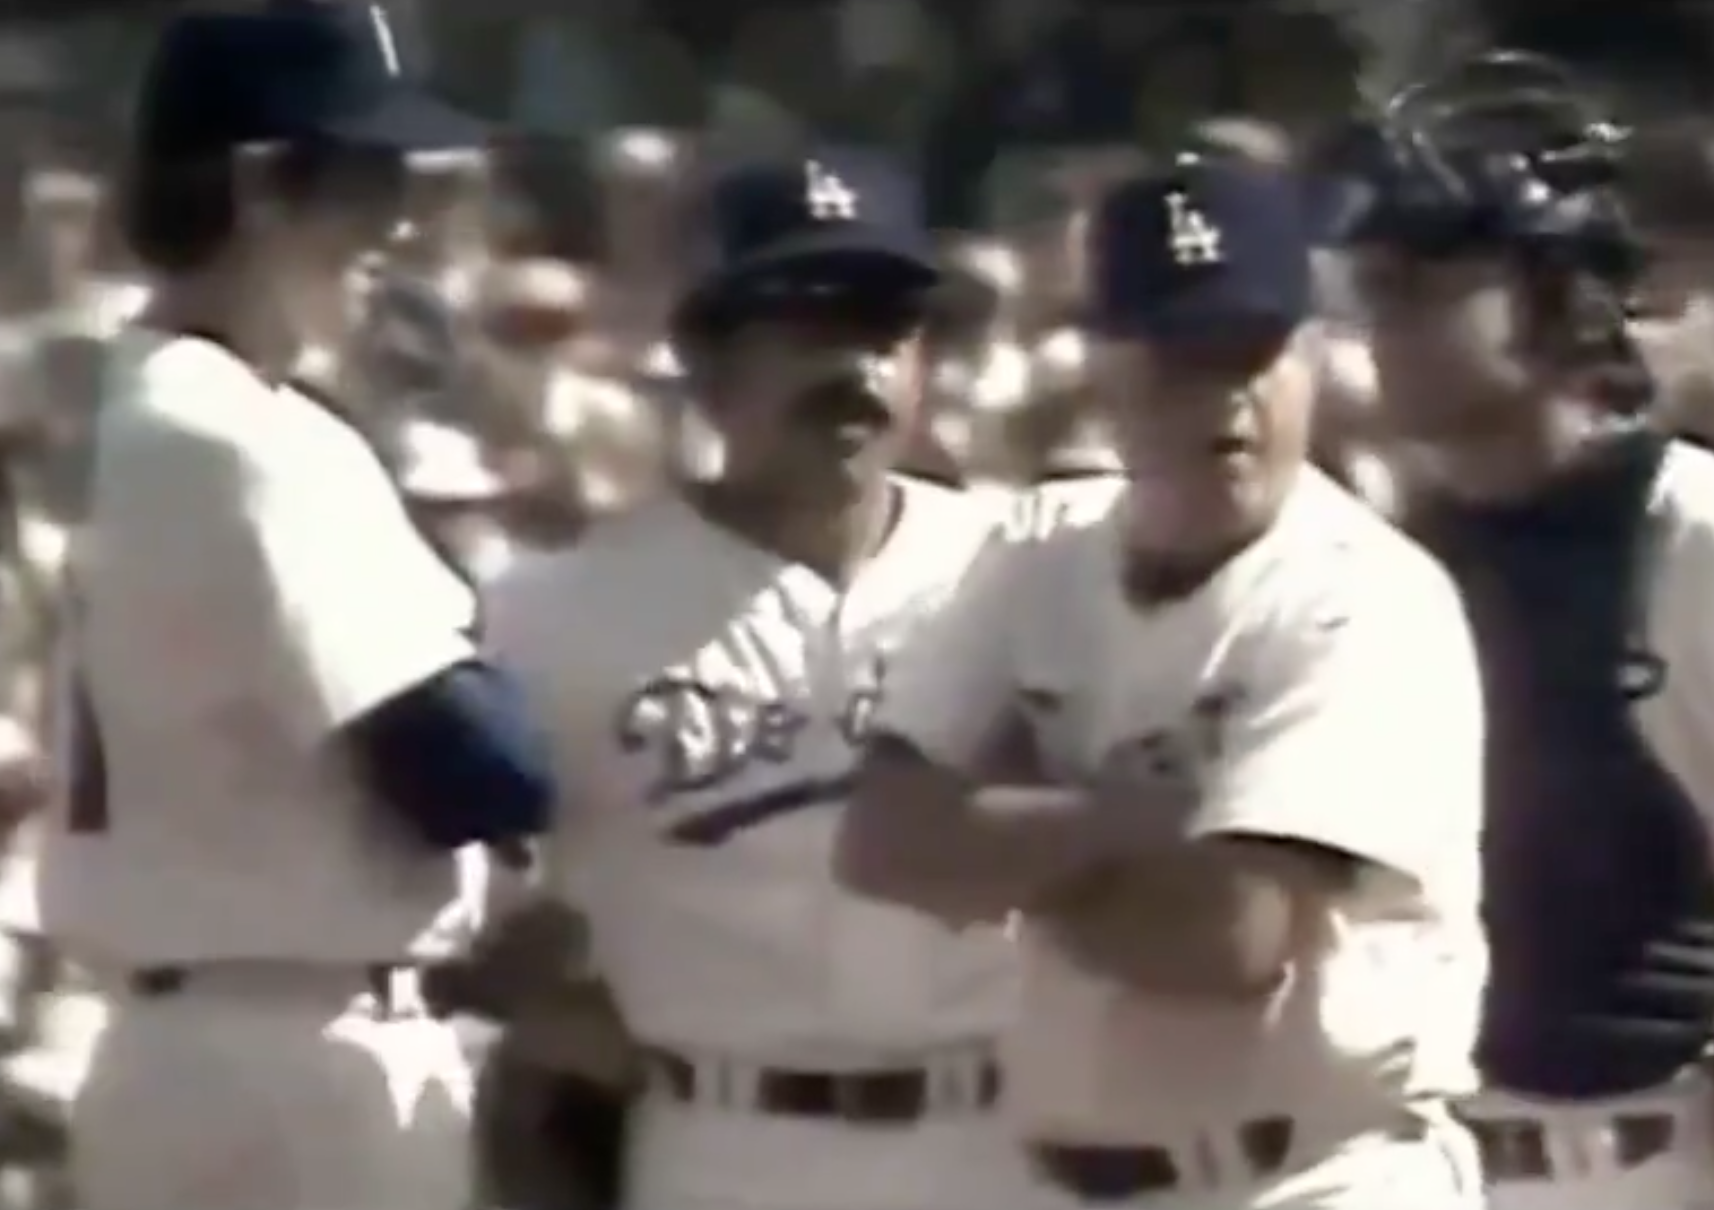 Where has this video of Tommy Lasorda telling his pitcher I'll